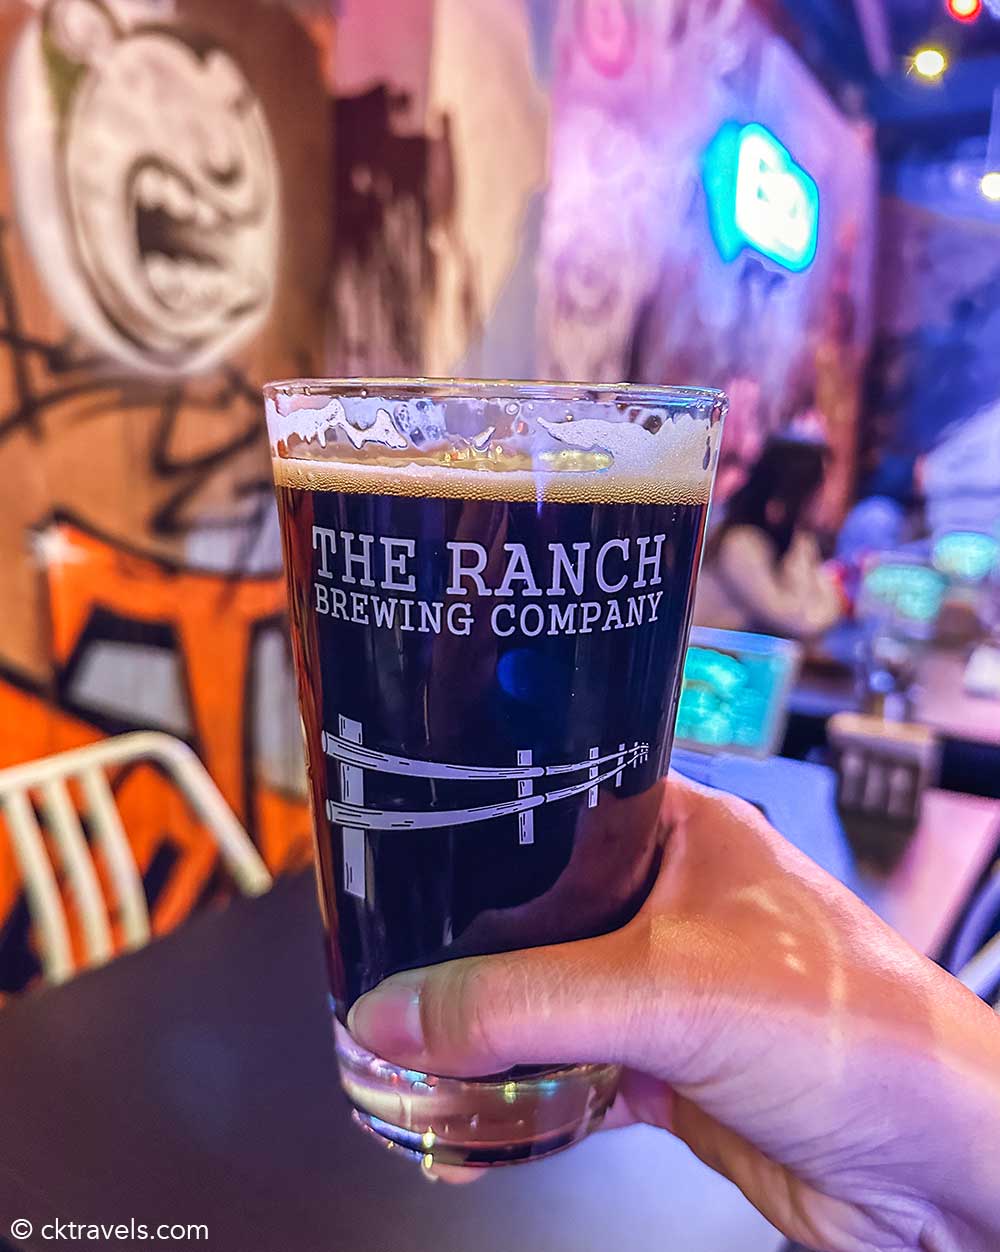 The Ranch Brewing Euljiro - Craft beer bar and brewery in Seoul, South Korea